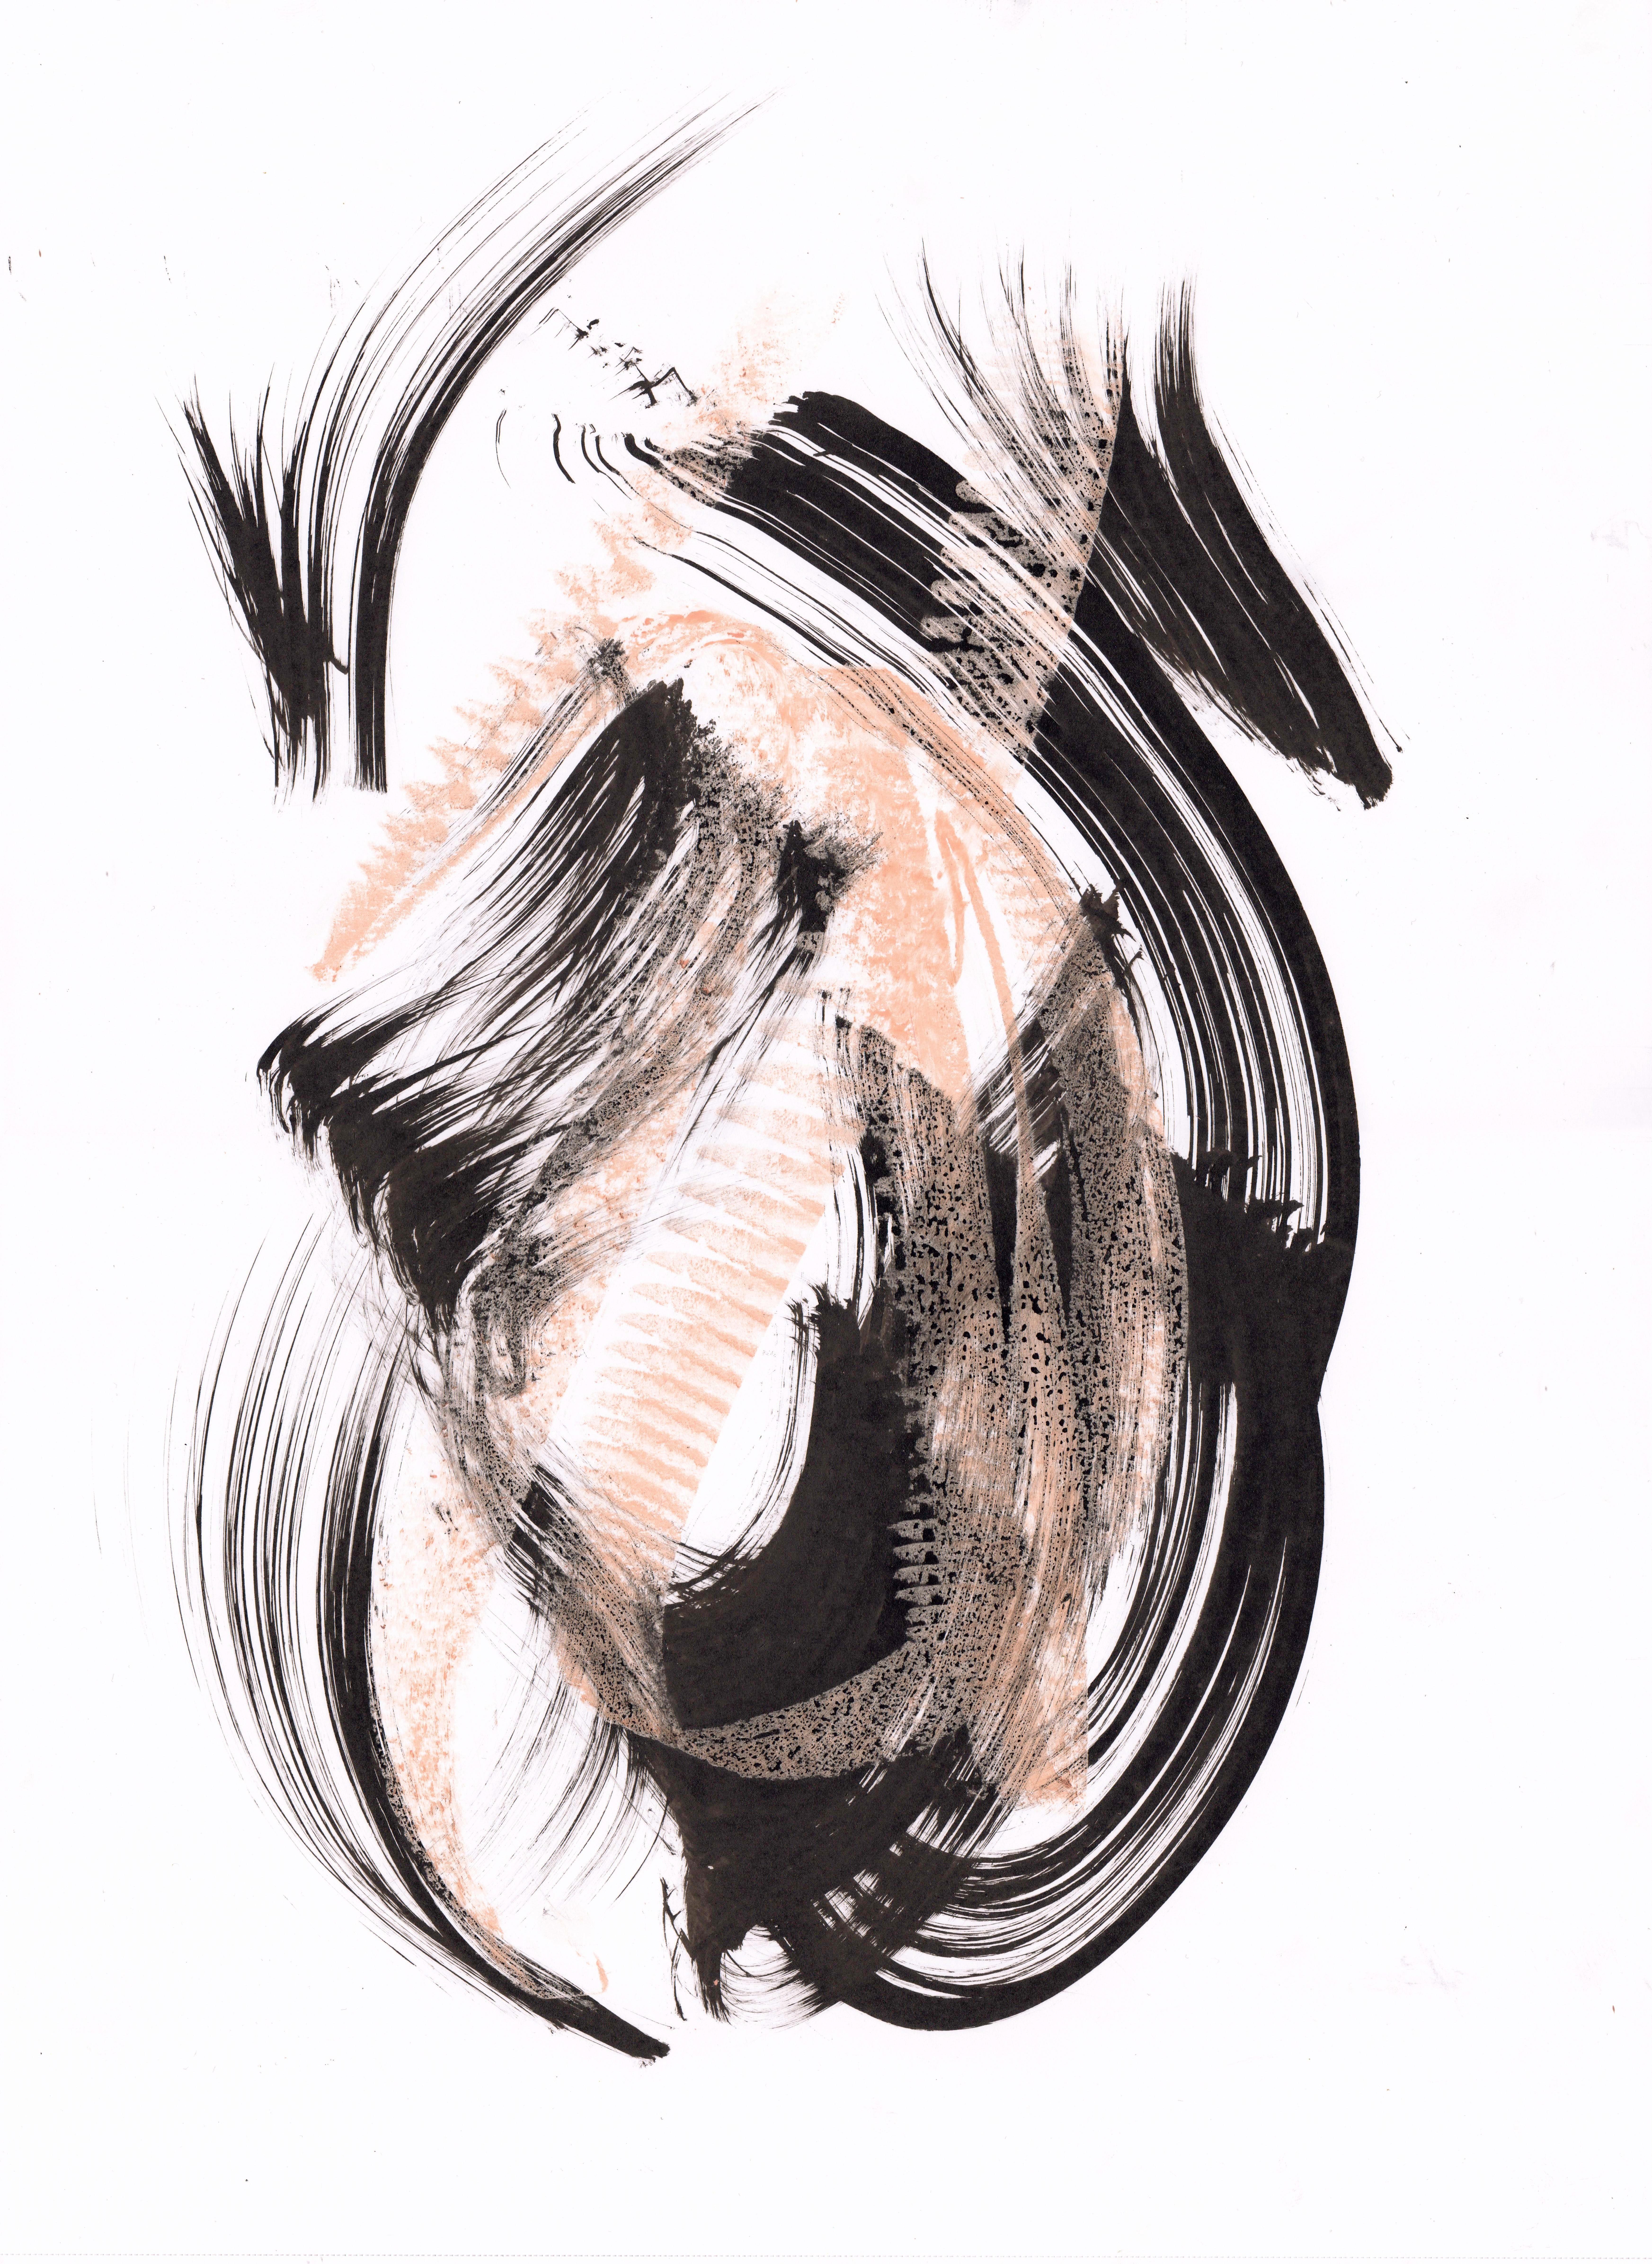 Сalligraphic Abstract Drawing. Flying Brush - Art by Sve Gri